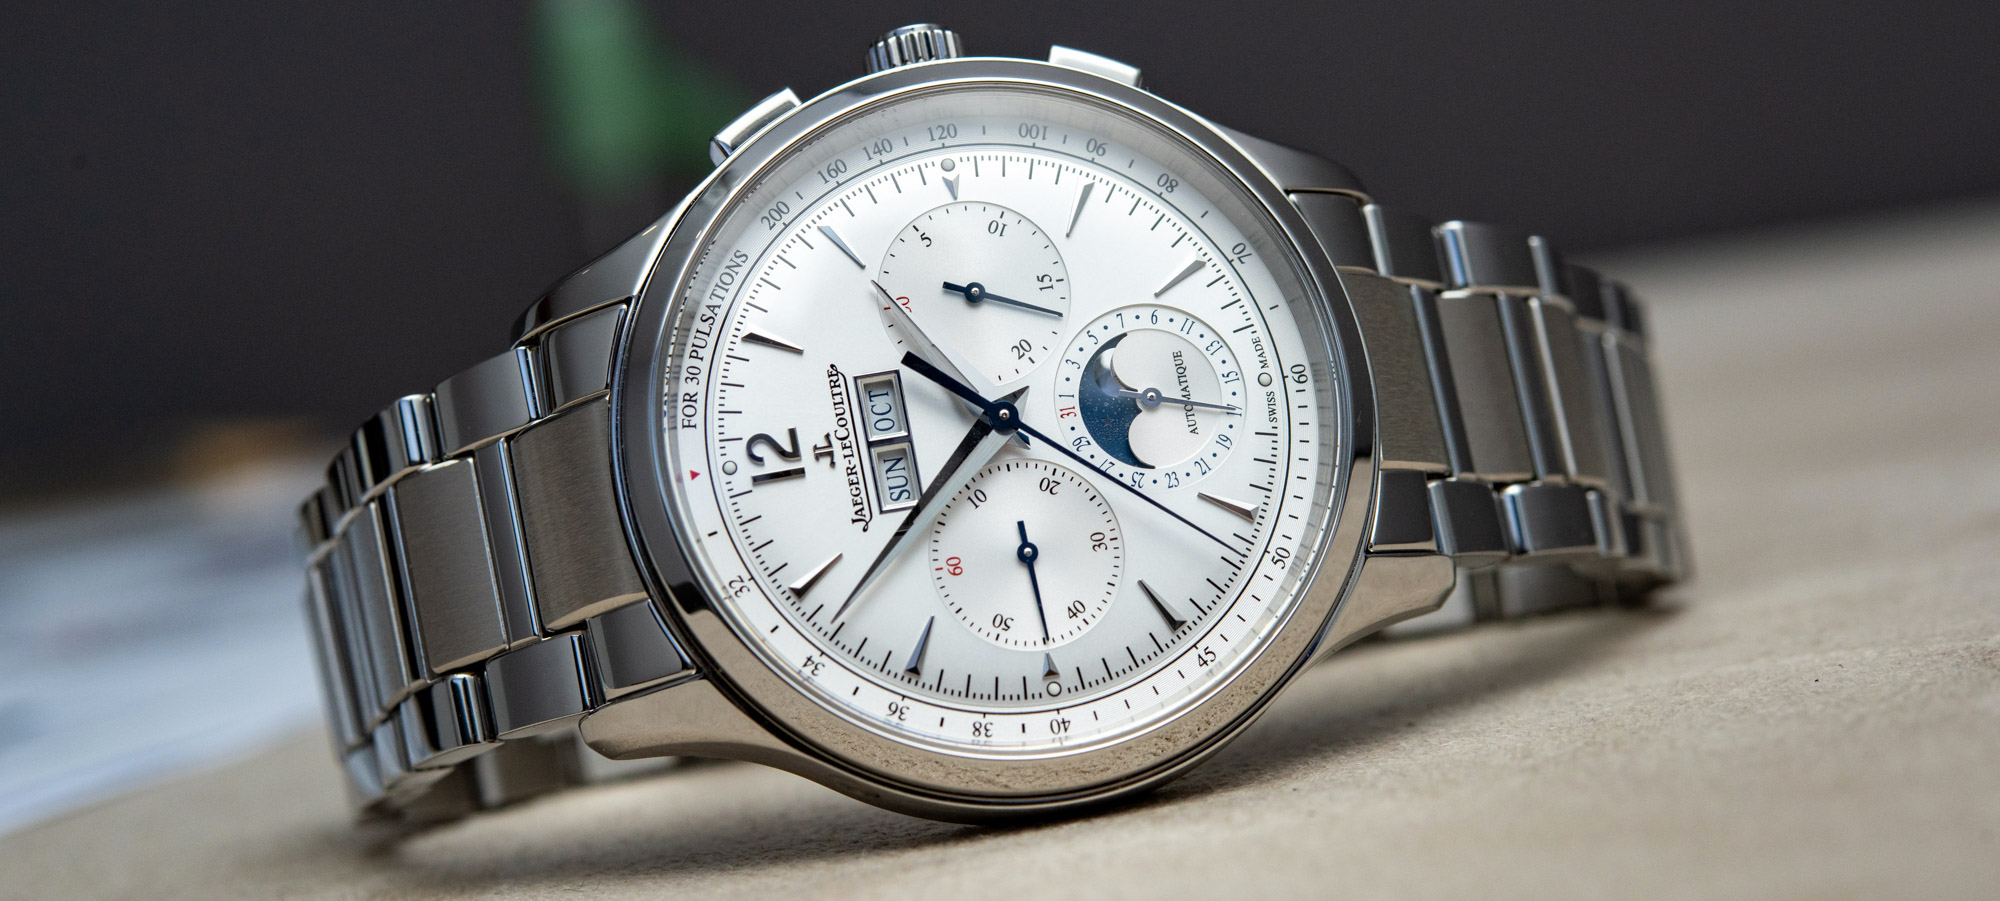 Buying Guide - Best of Perpetual Calendar of 2021 by MONOCHROME